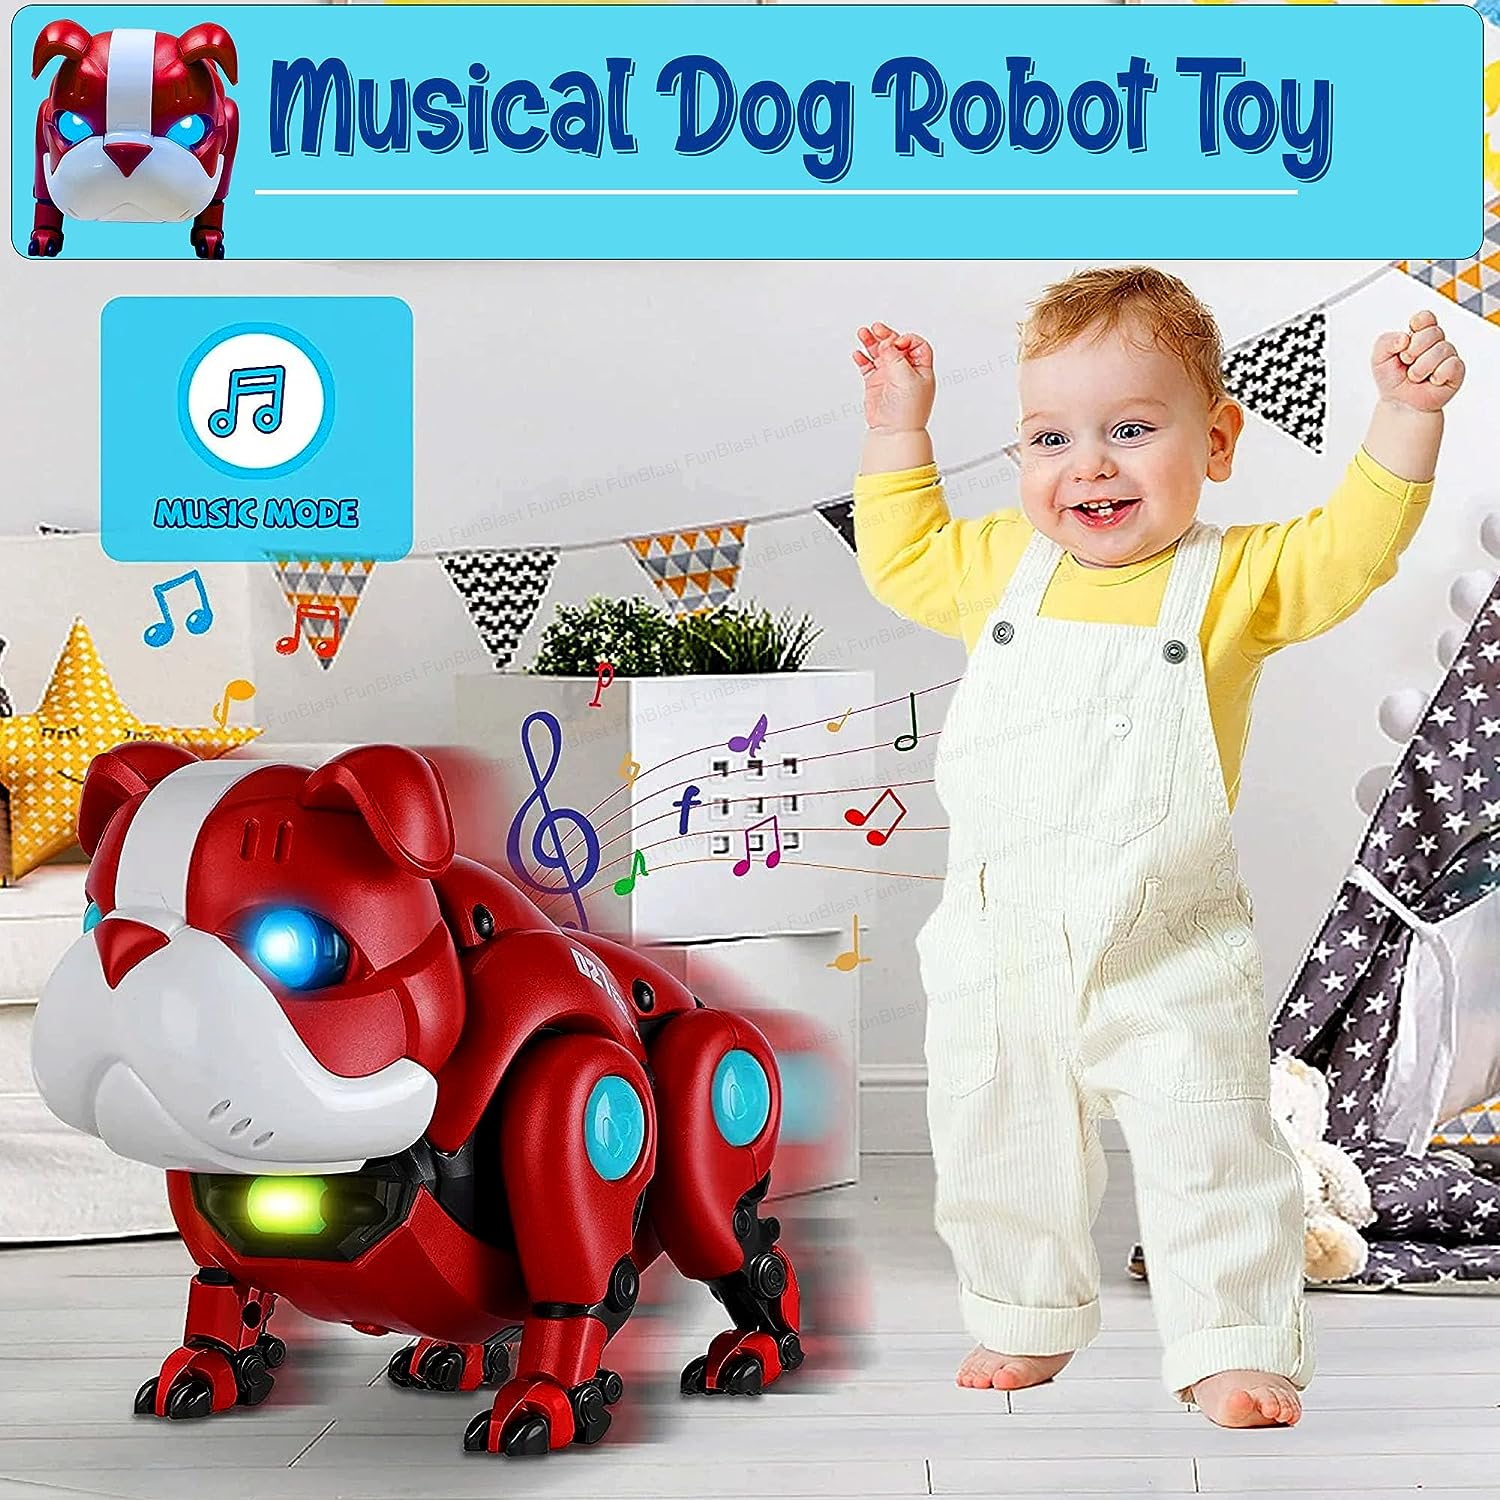 Robot Dog Toy – Musical Dog Robot Toy with Colorful Flashing Lights and Music for Kids Boys Girls, Robot Dog Toy Action Figure, Robot Toys for 3+ Years Old Kids